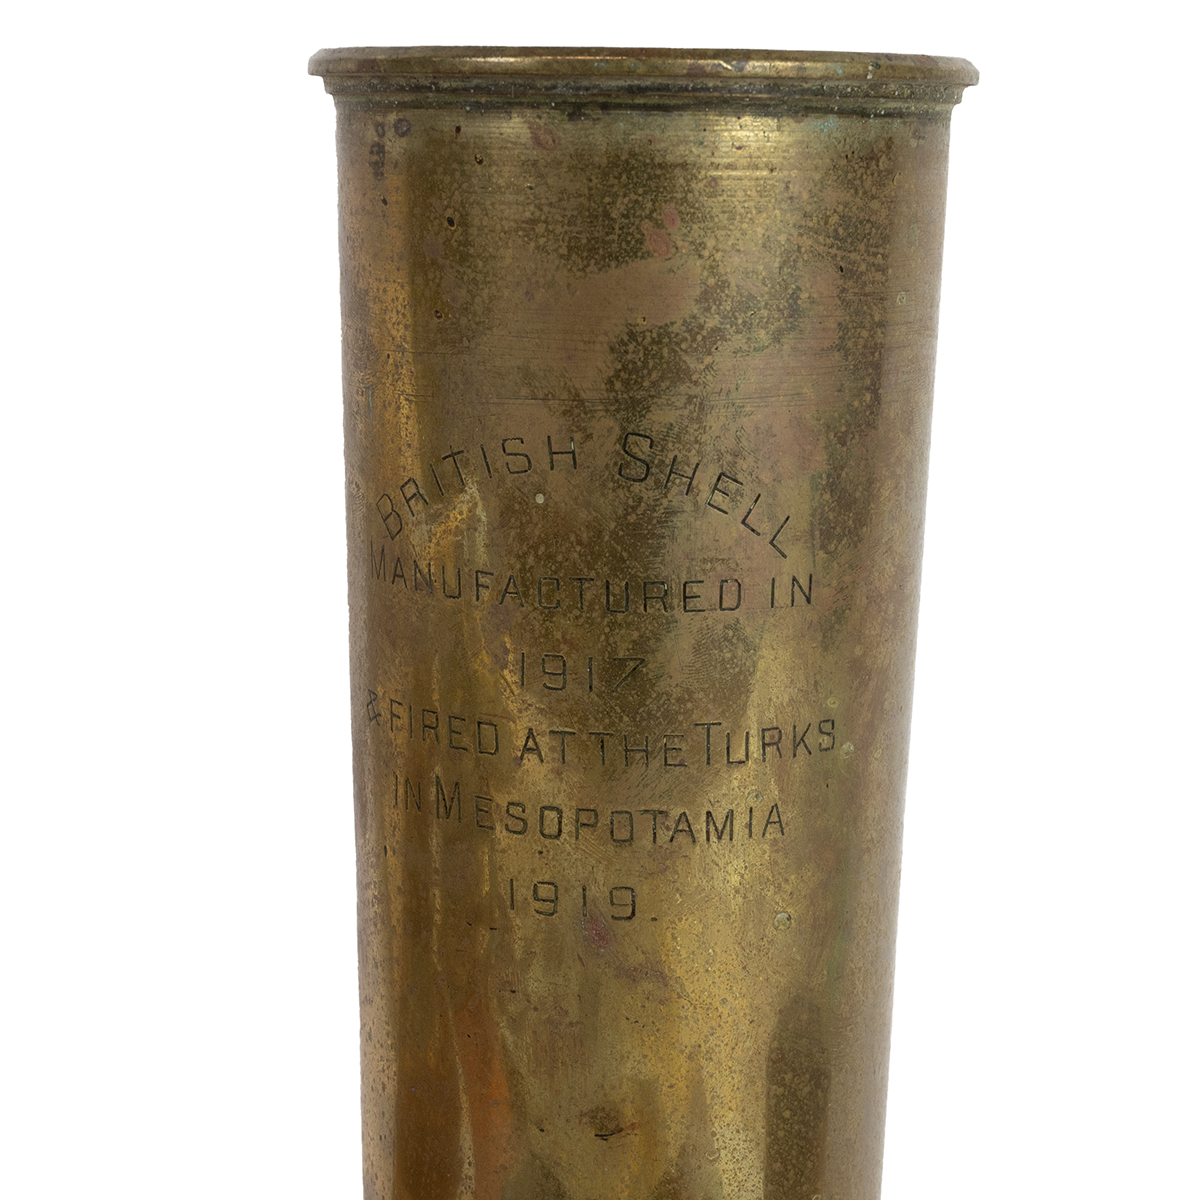 Mixed group of mainly WW1 & WW2 military collectables. WW1 shell case engraved 'British shell man... - Image 2 of 3